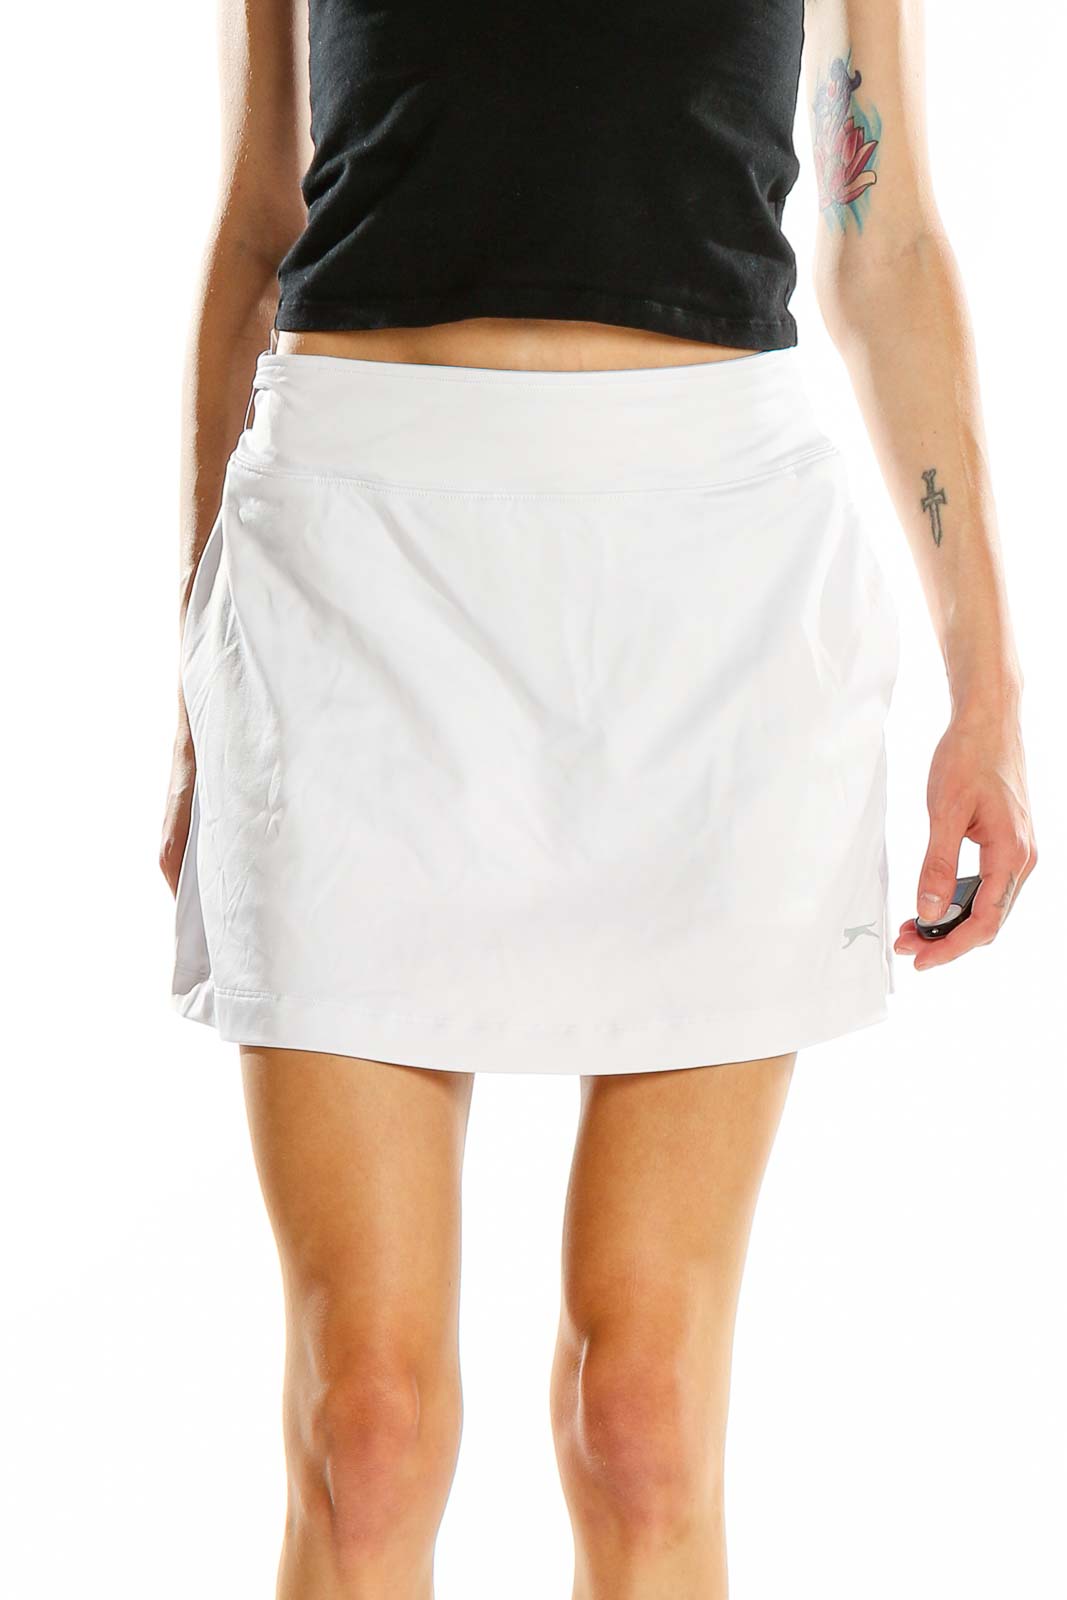 White Activewear Skirt Front